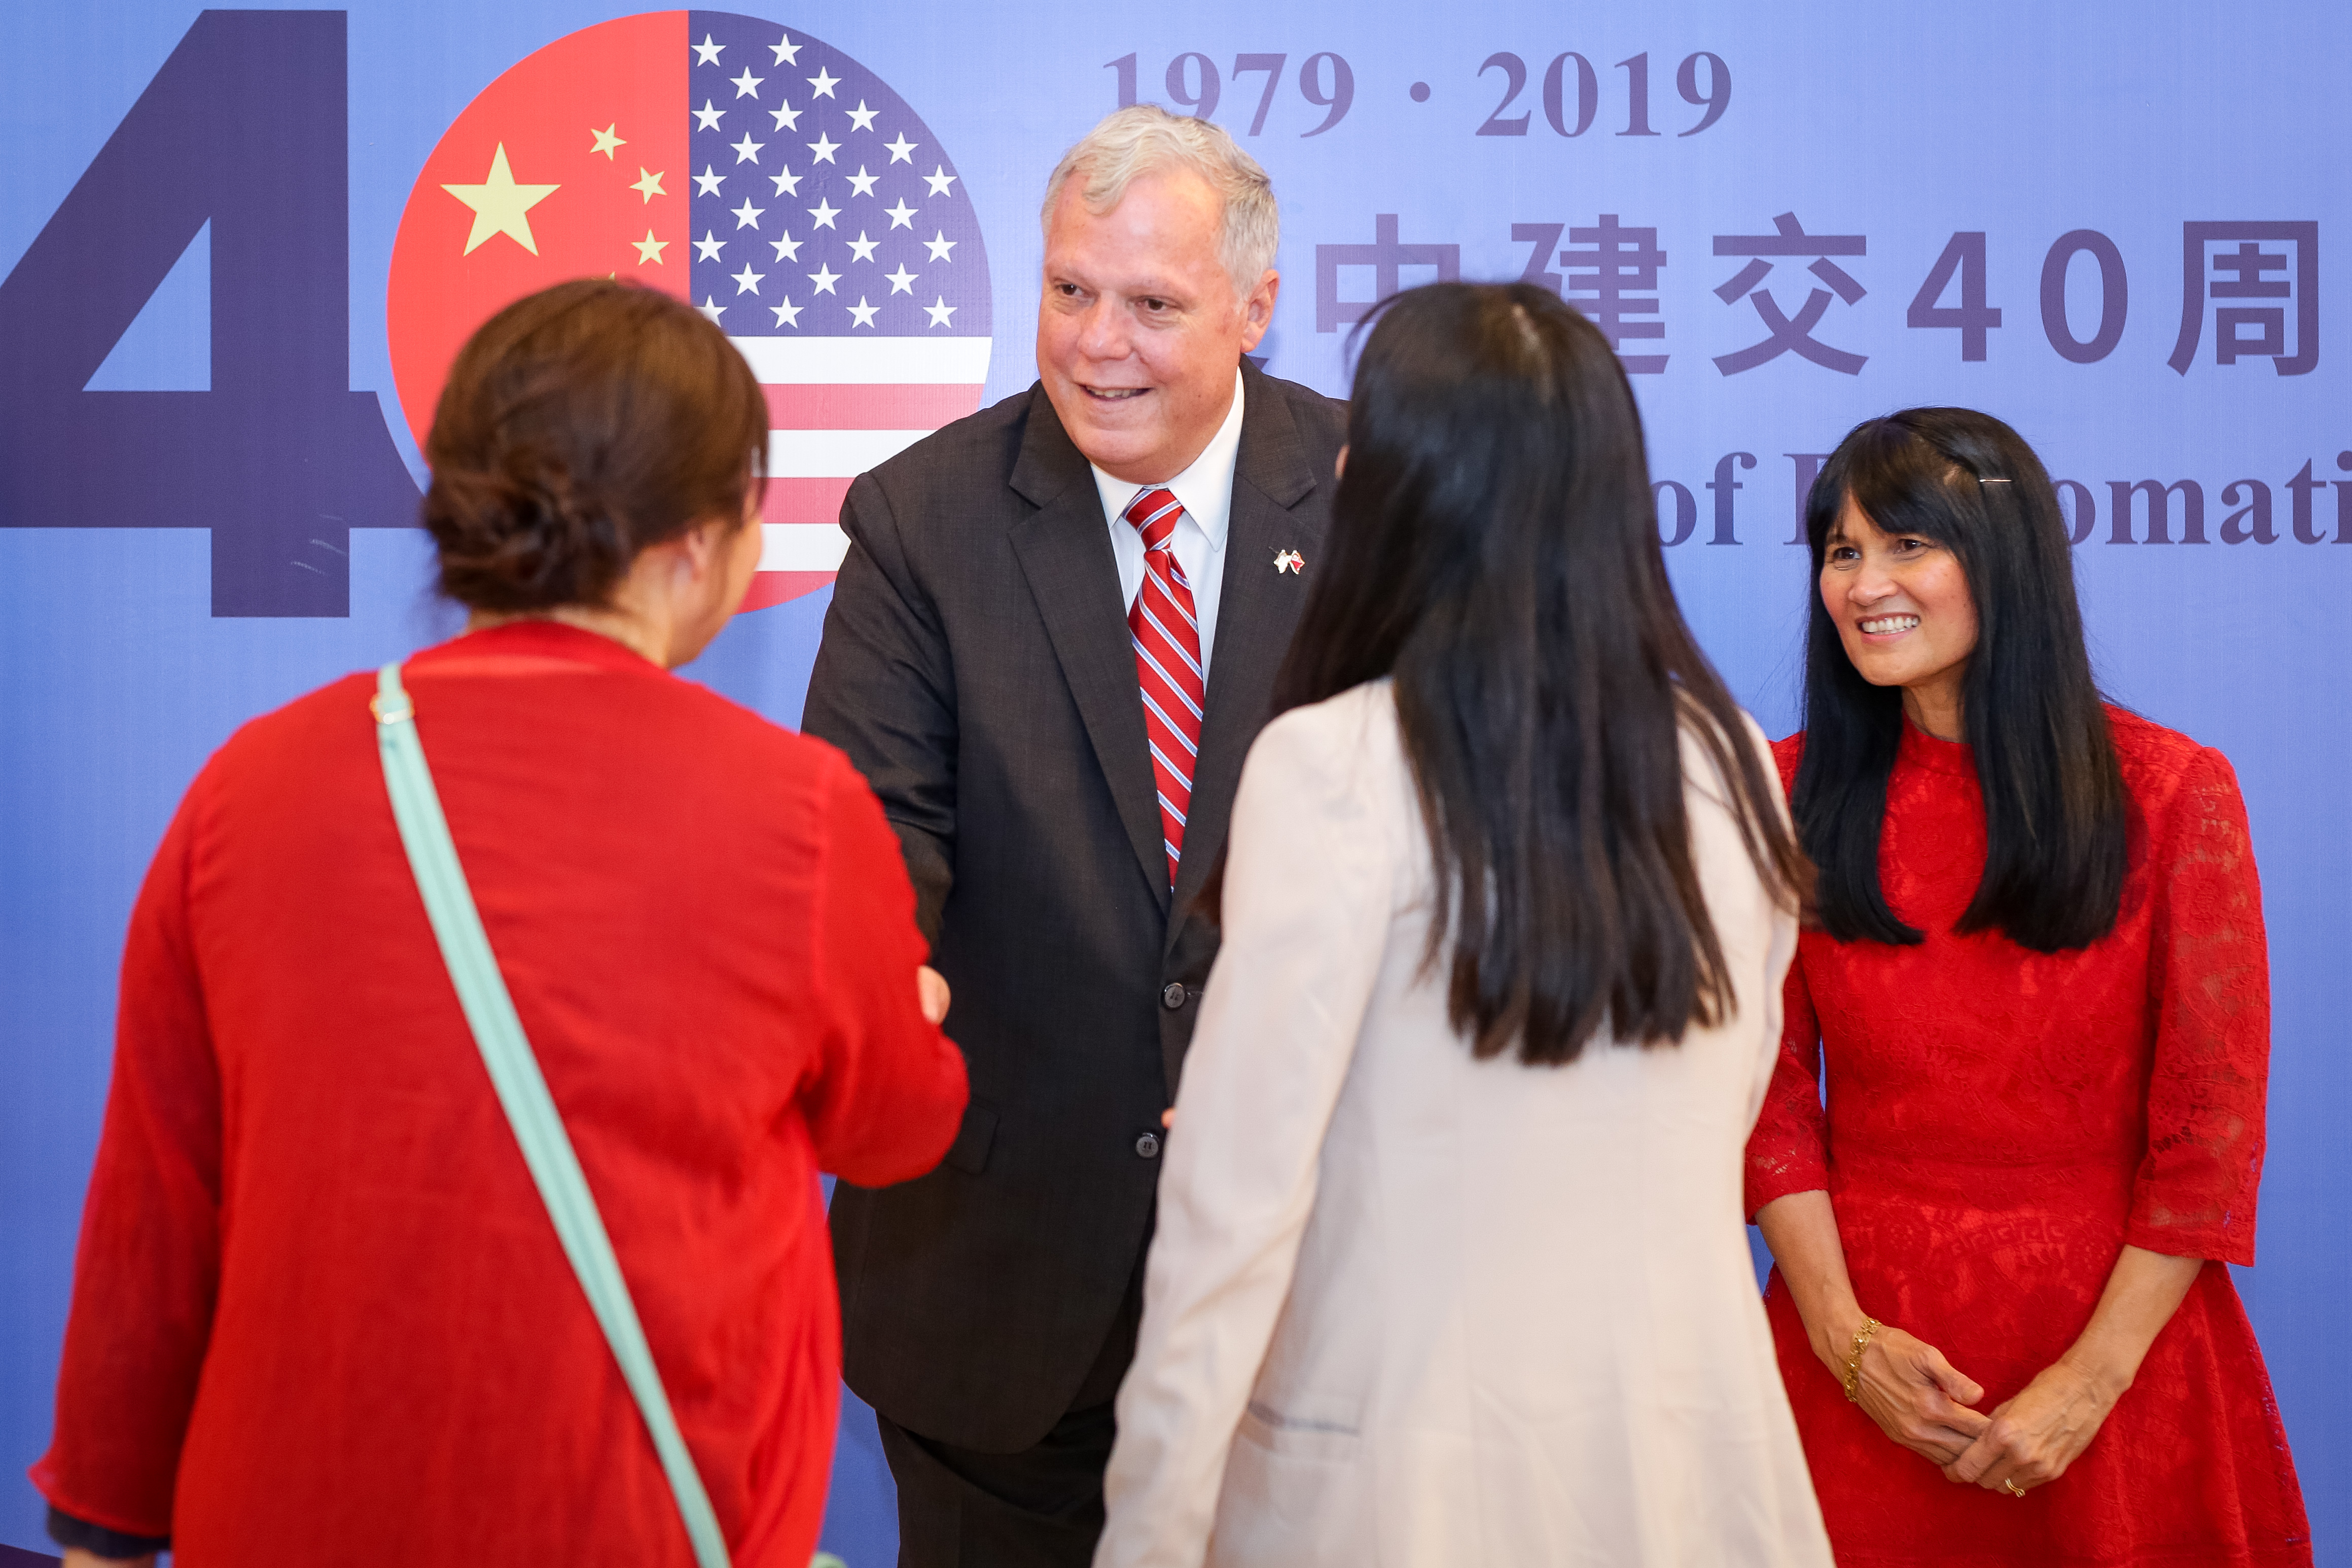 A man in a suit (Jamie Fouss) stands and a woman in a red dress greet two women who are facing away from the camera. In the background a large banner  commemorates the 40th anniversary of U.S.-China diplomatic relations.